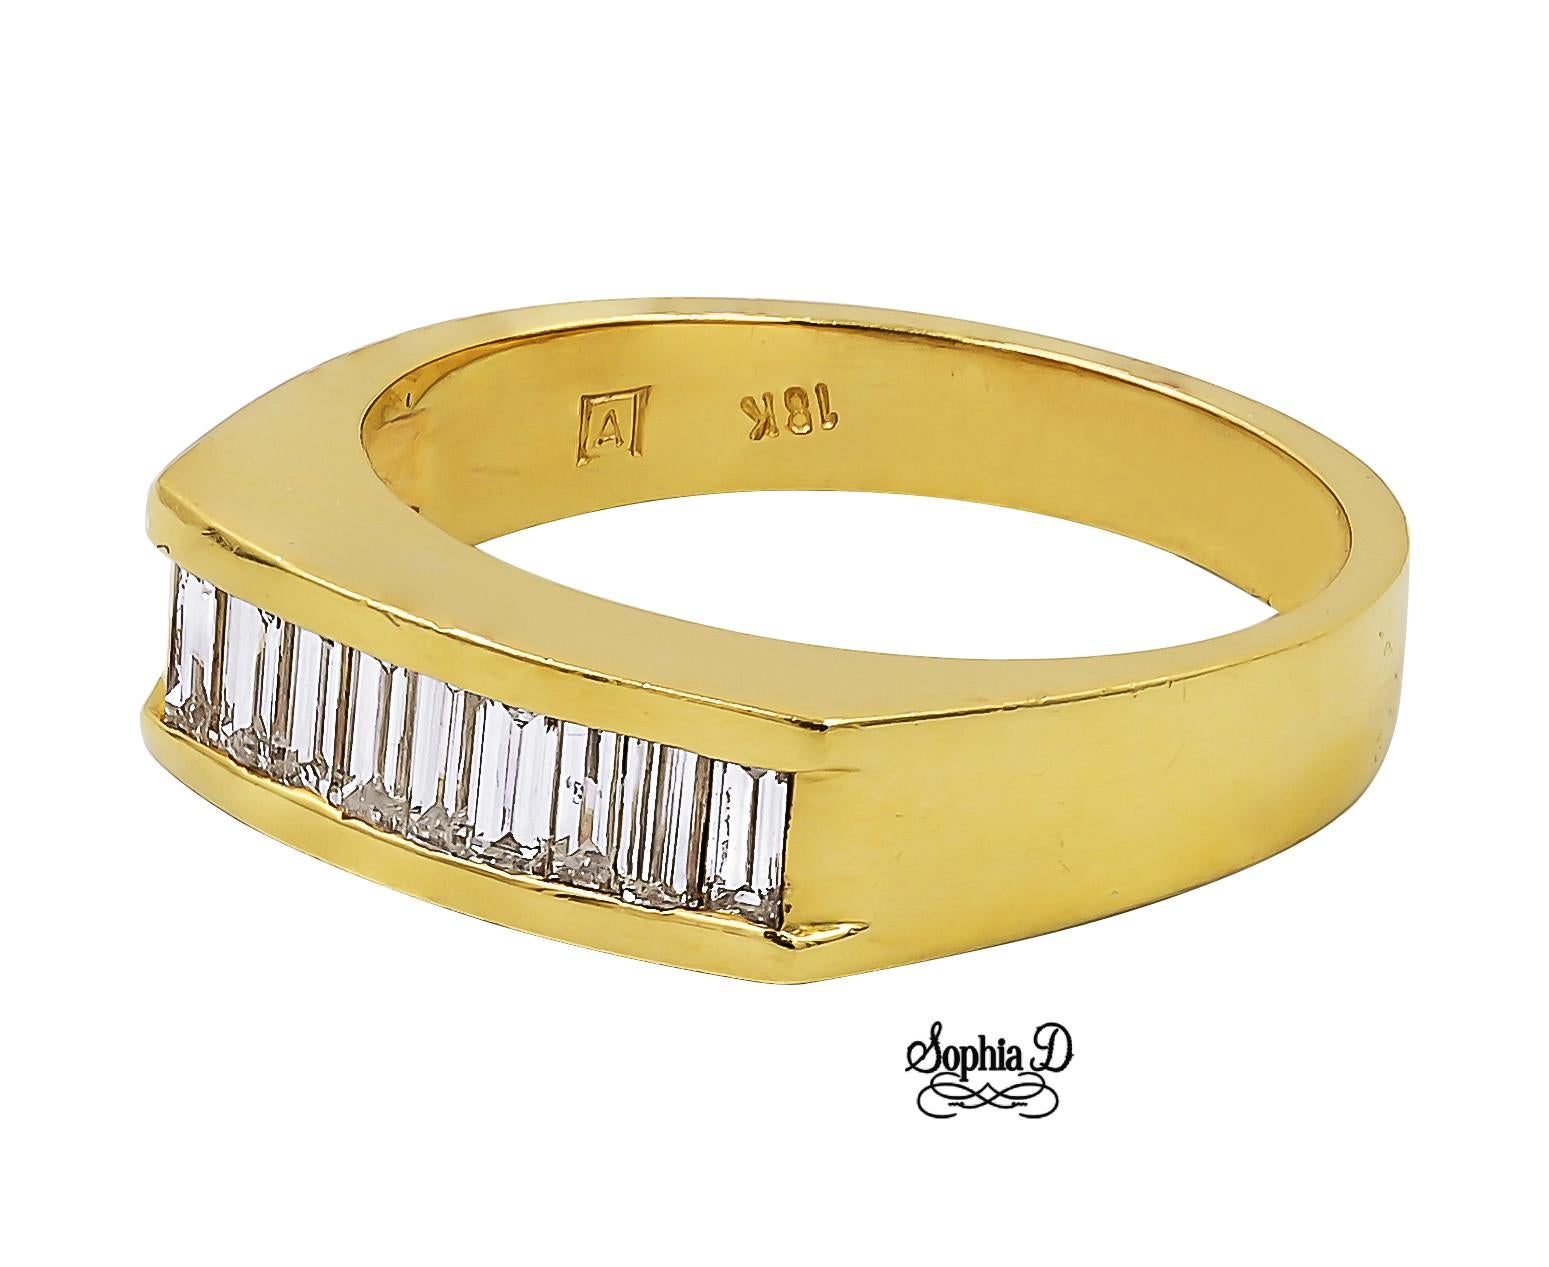 18K yellow gold ring with baguette cut diamonds.

Sophia D by Joseph Dardashti LTD has been known worldwide for 35 years and are inspired by classic Art Deco design that merges with modern manufacturing techniques.  